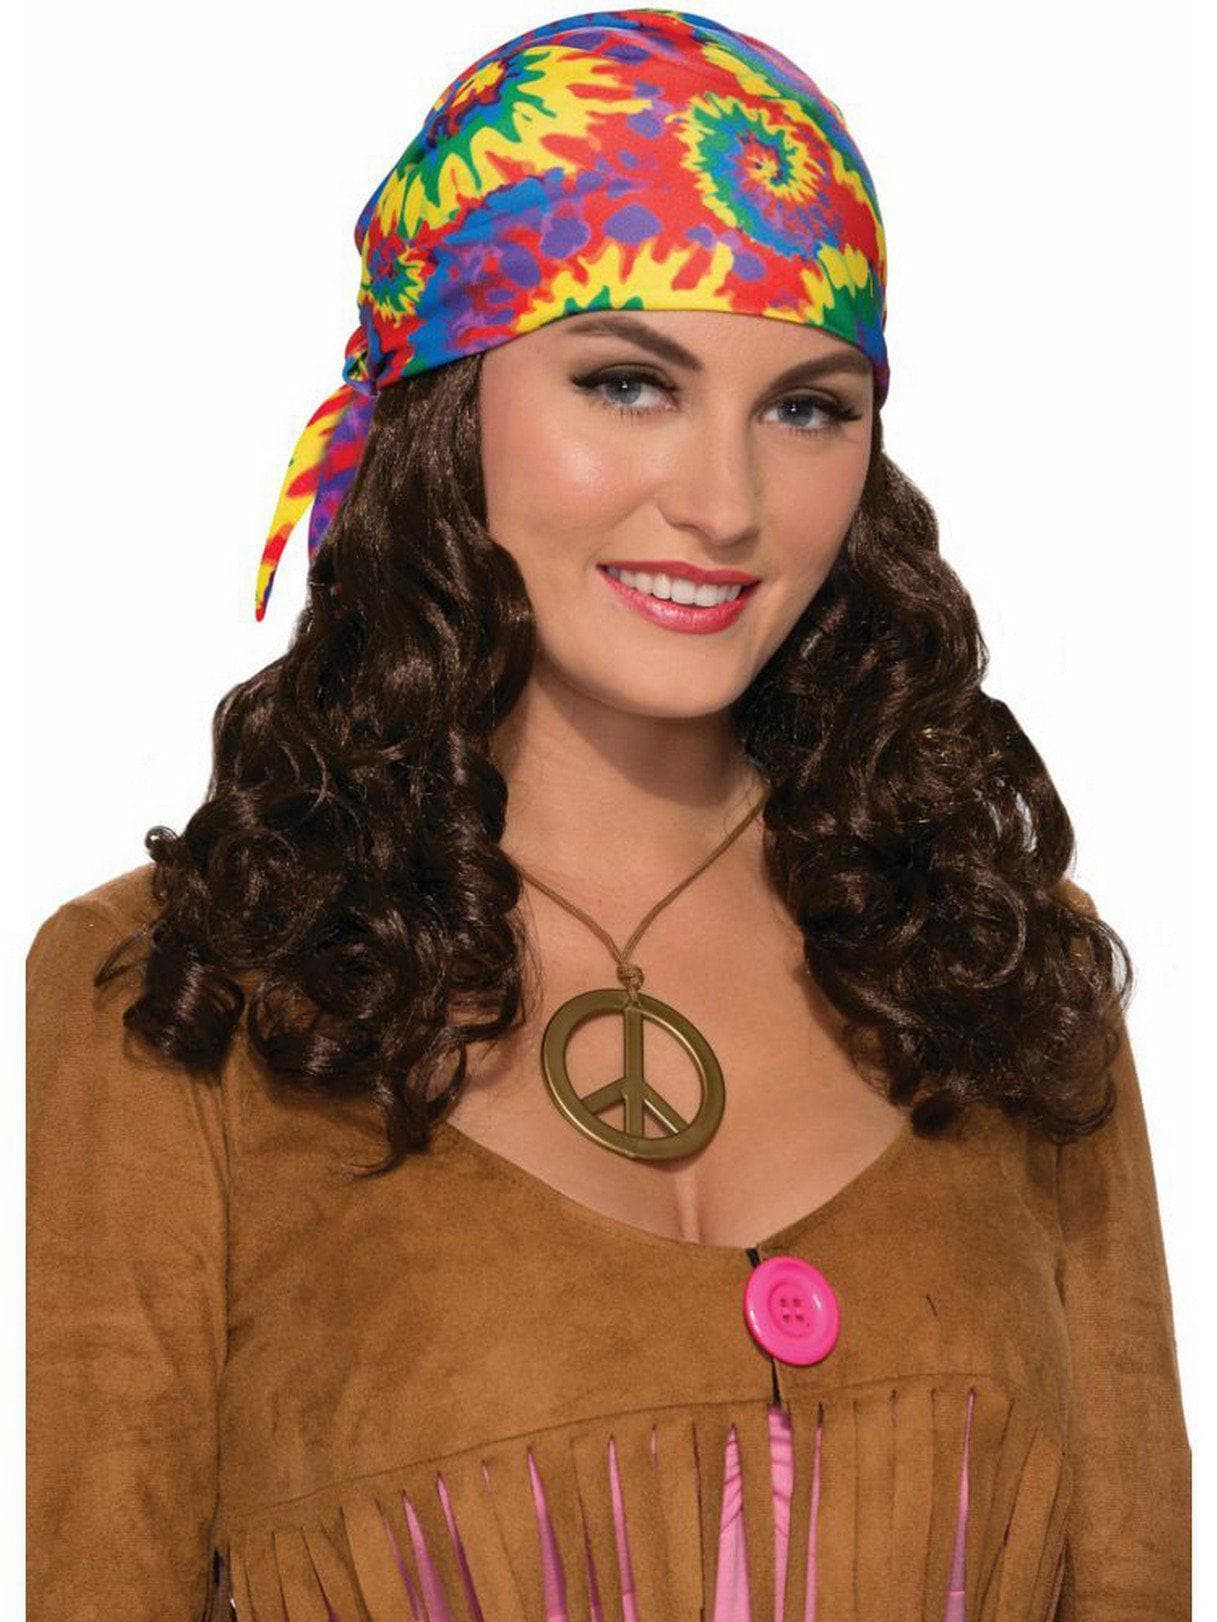 Hippie Wig With Headscarf - costumes.com